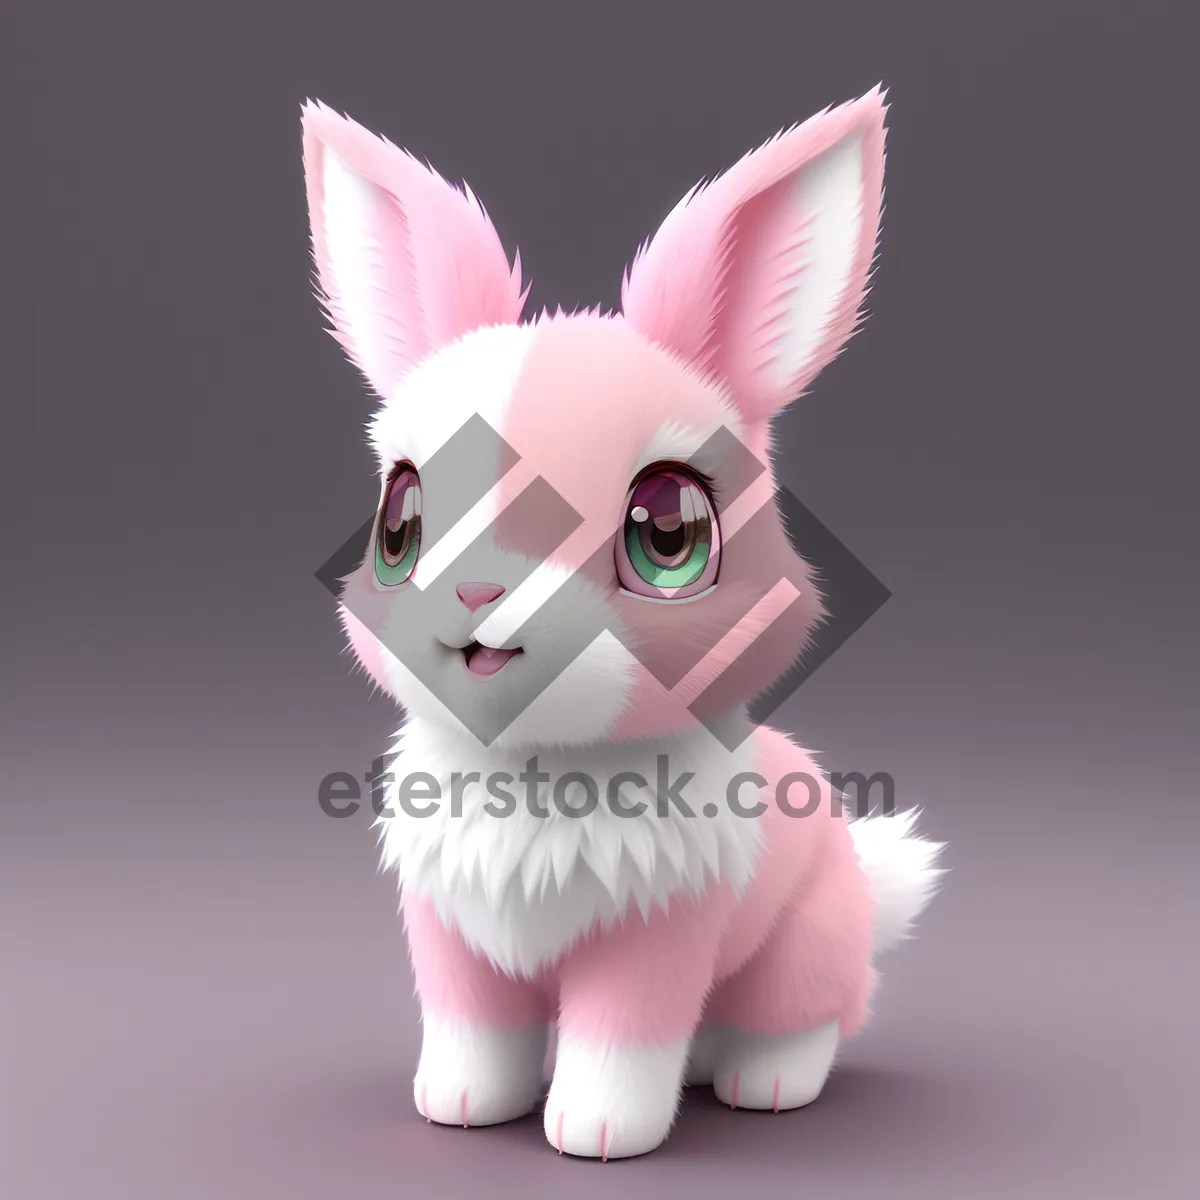 Picture of Fluffy Bunny Cartoon Illustration